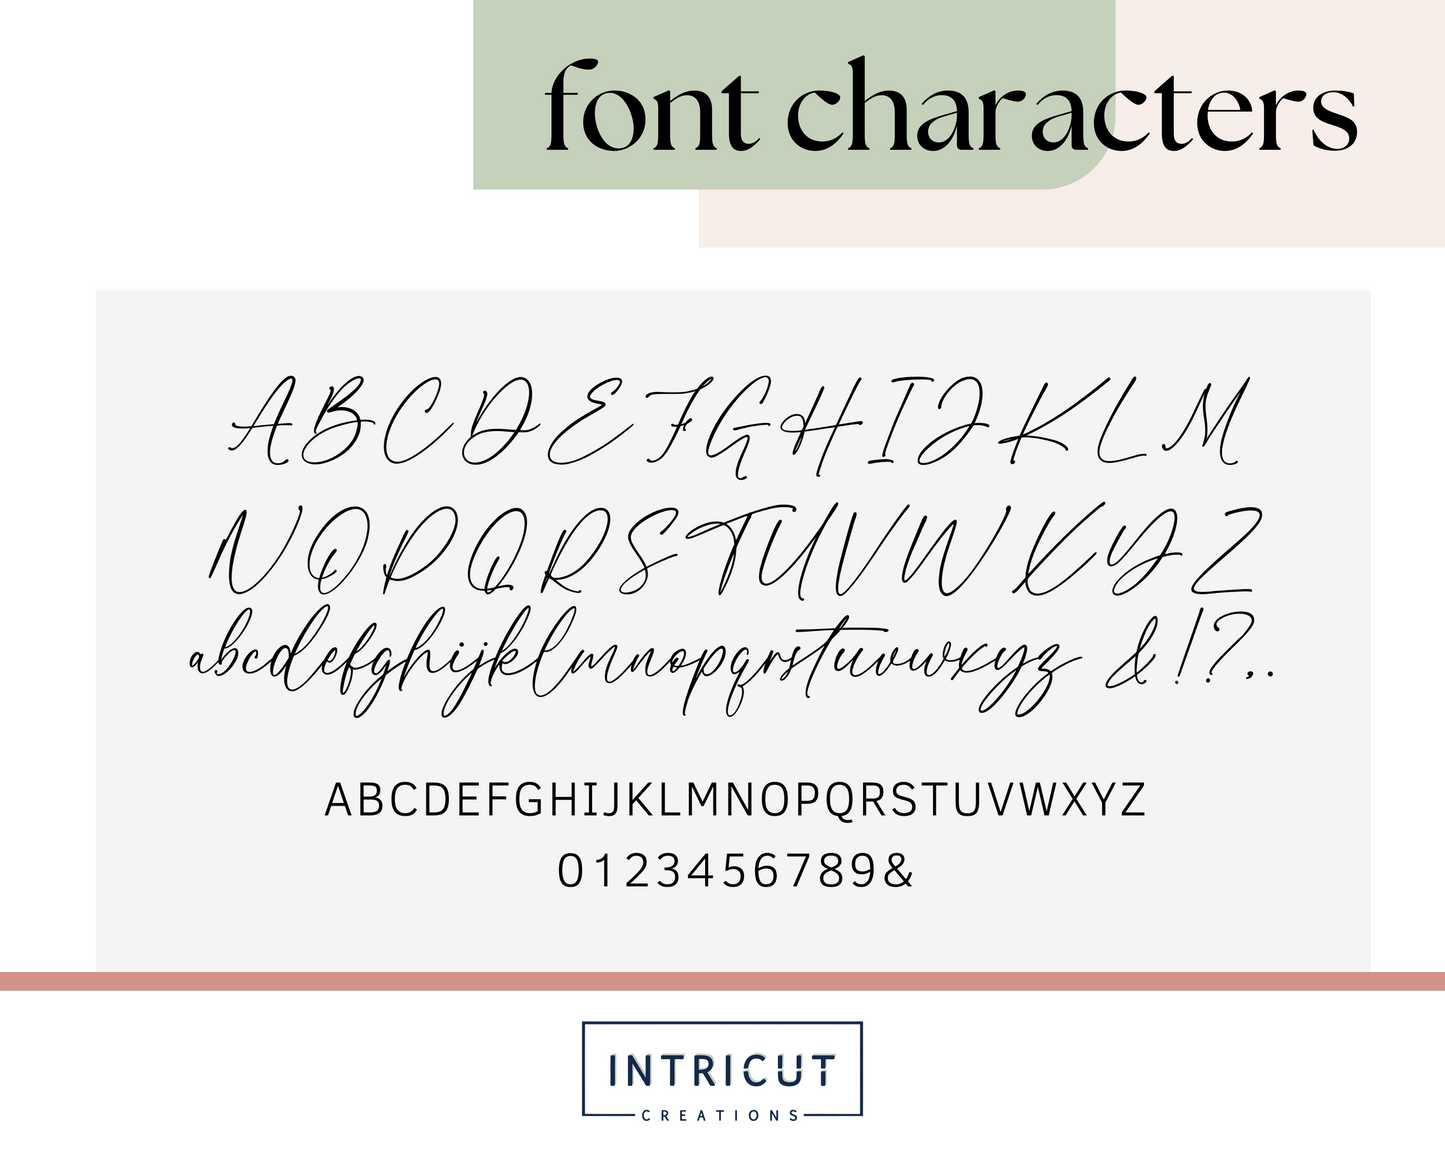 font characters, every letter visual